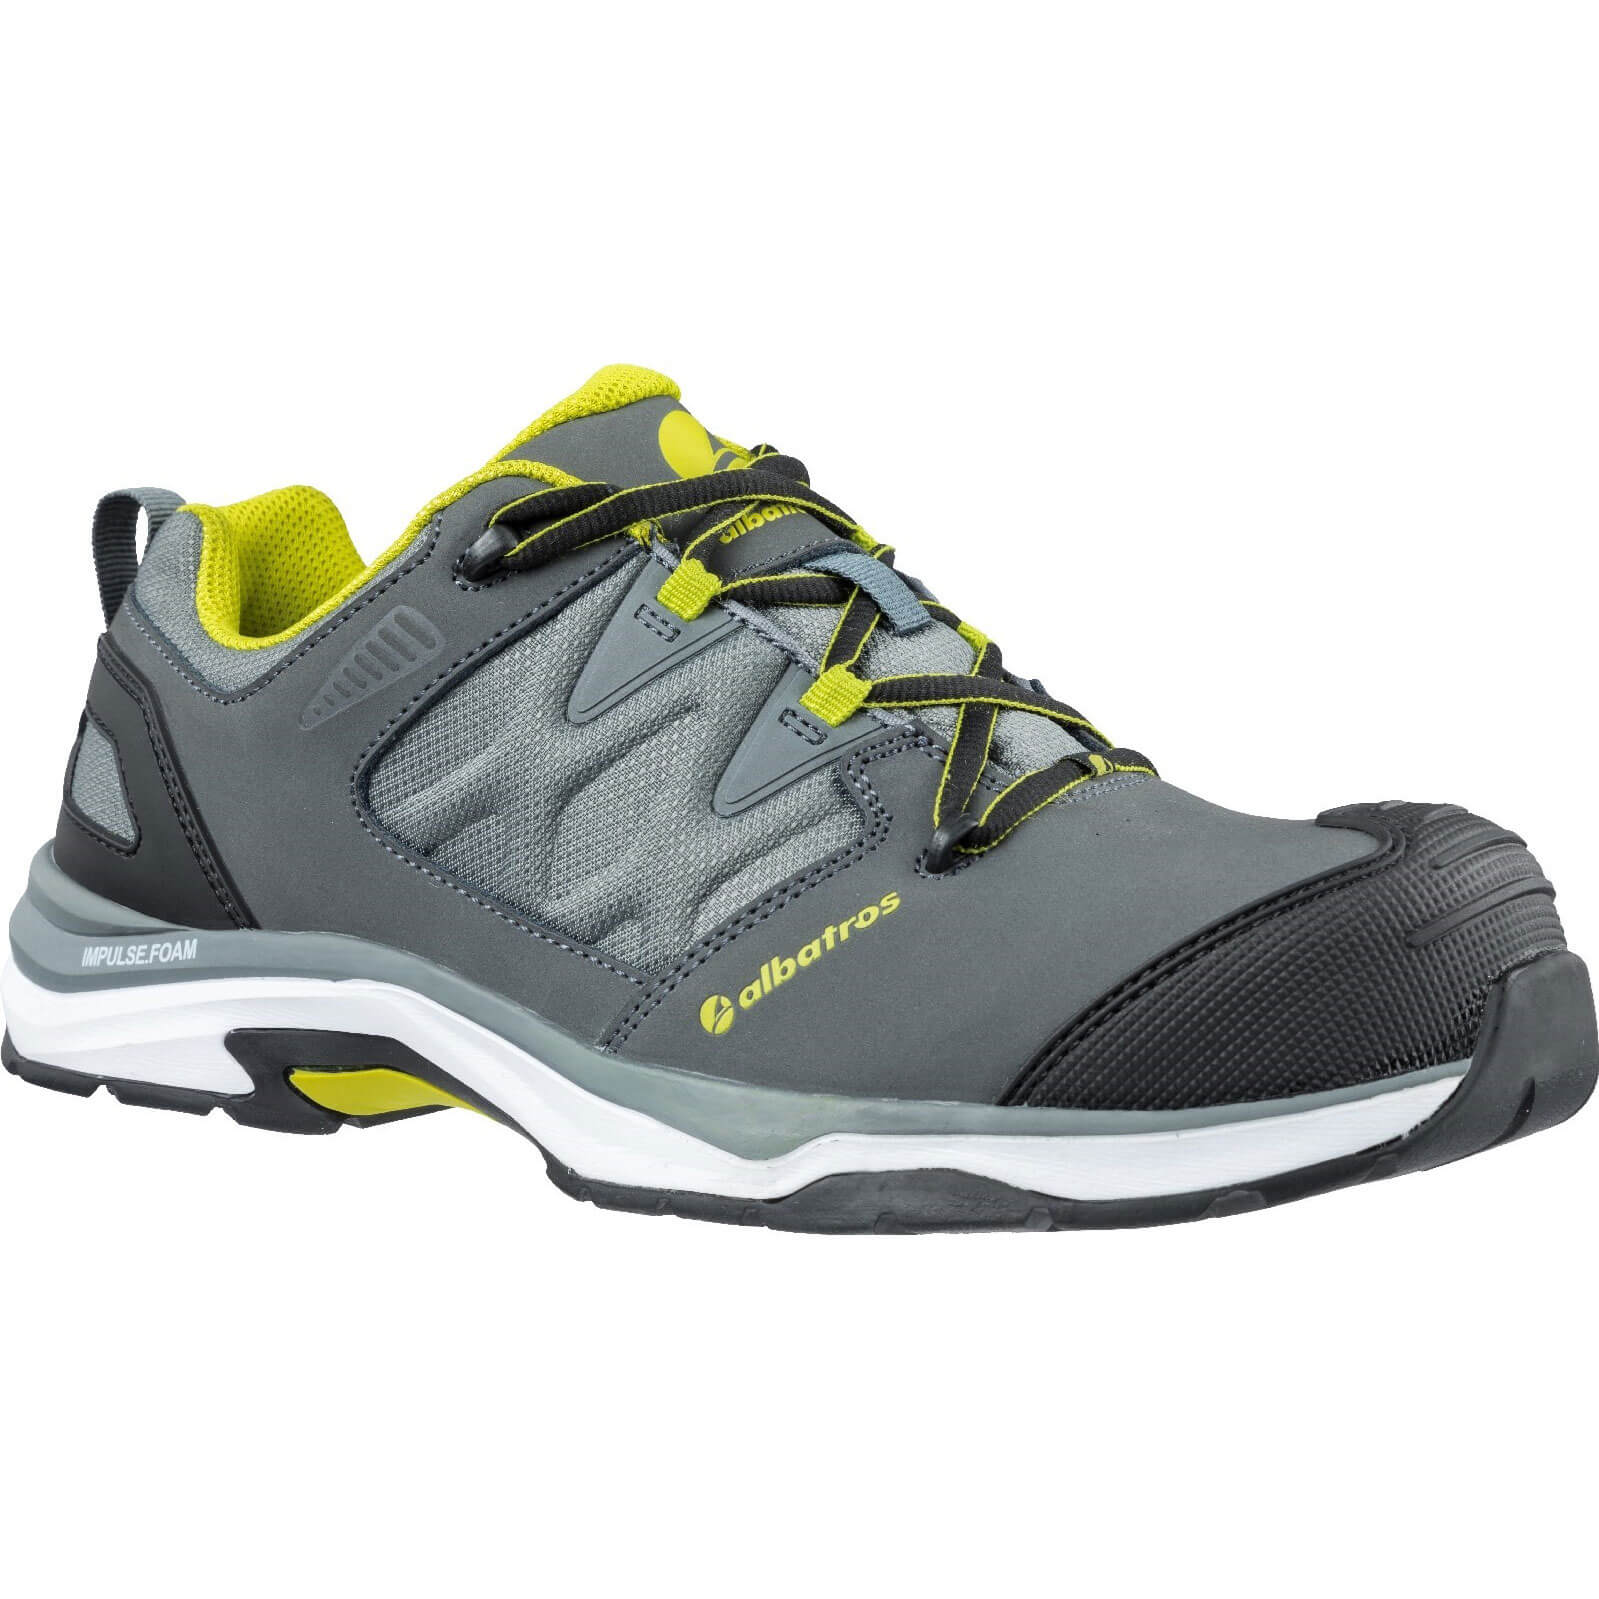 Image of Albatros Ultratrail Low Lace Up Safety Shoe Grey Size 10